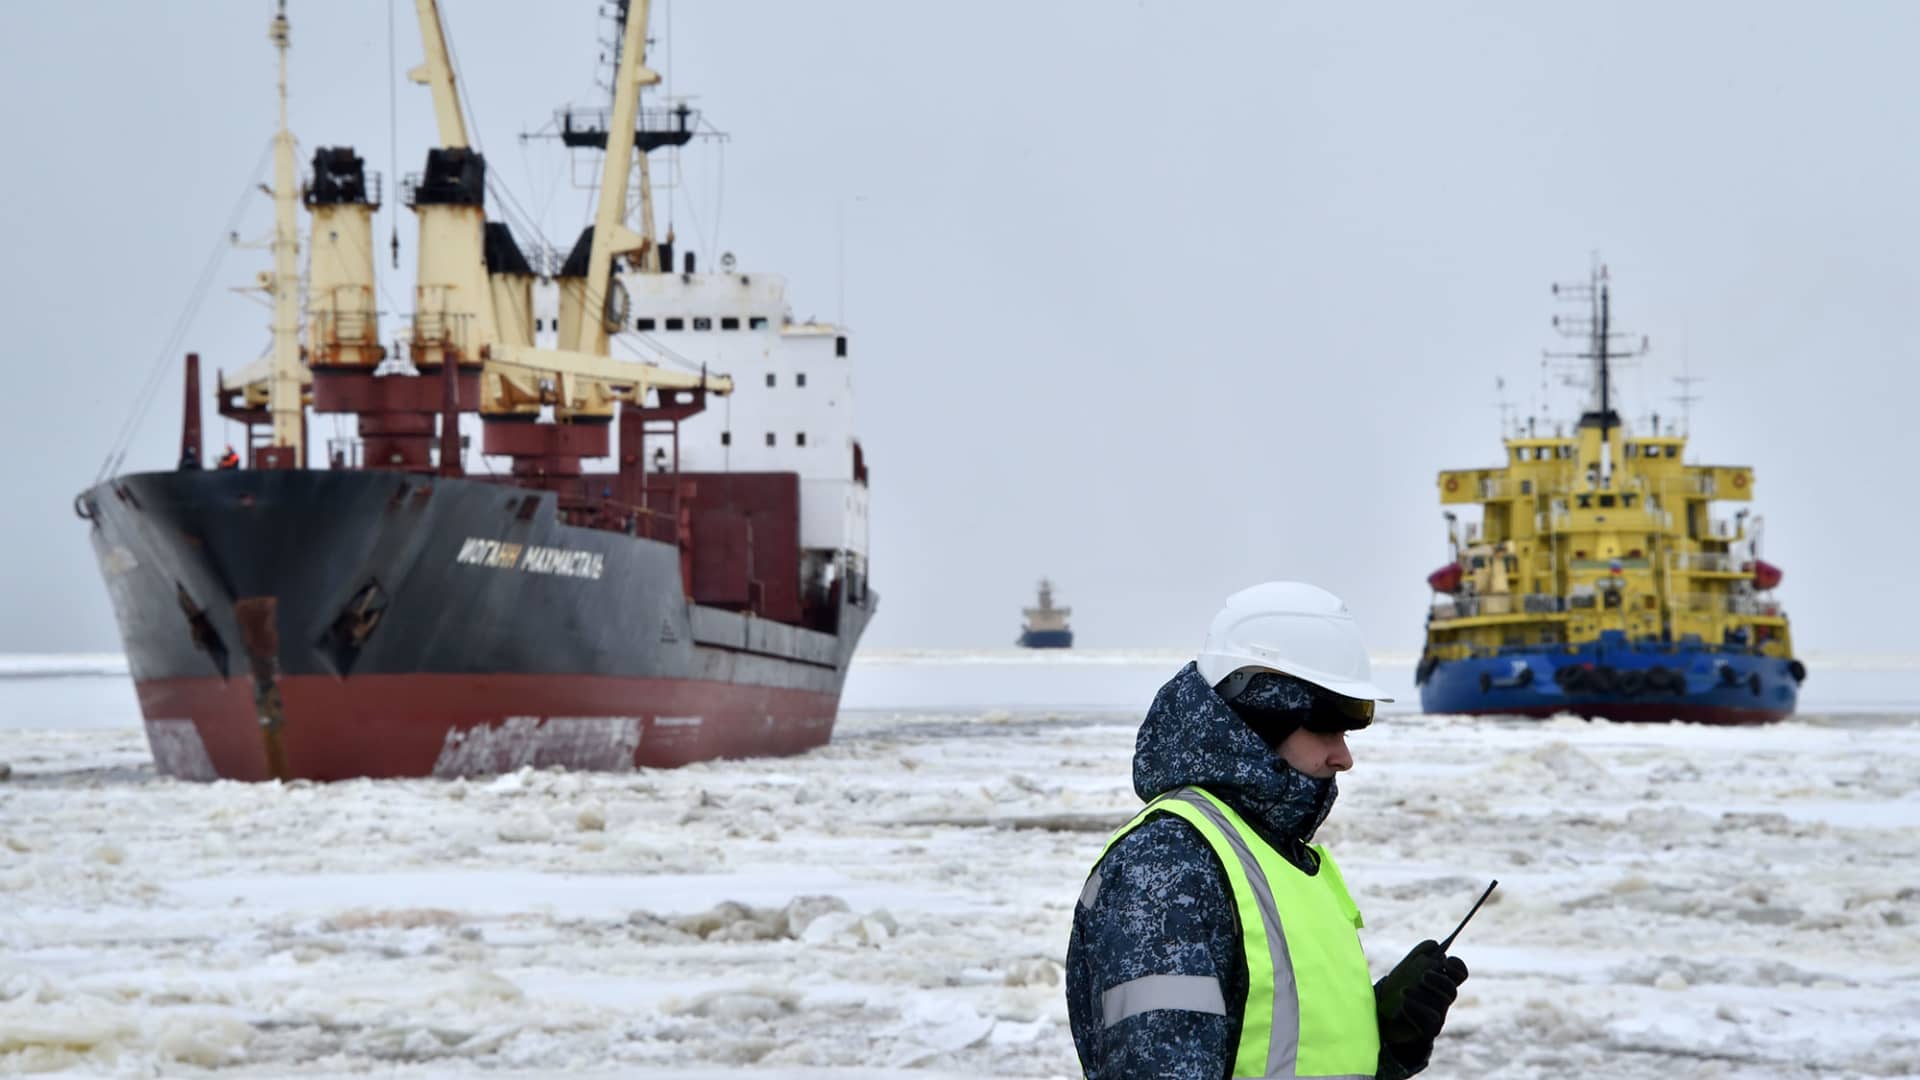 The icebreaker Tor (right) at the port of Sabetta in the Kara Sea shoreline on the Yamal Peninsula in the Arctic circle, some 2450 km of Moscow.